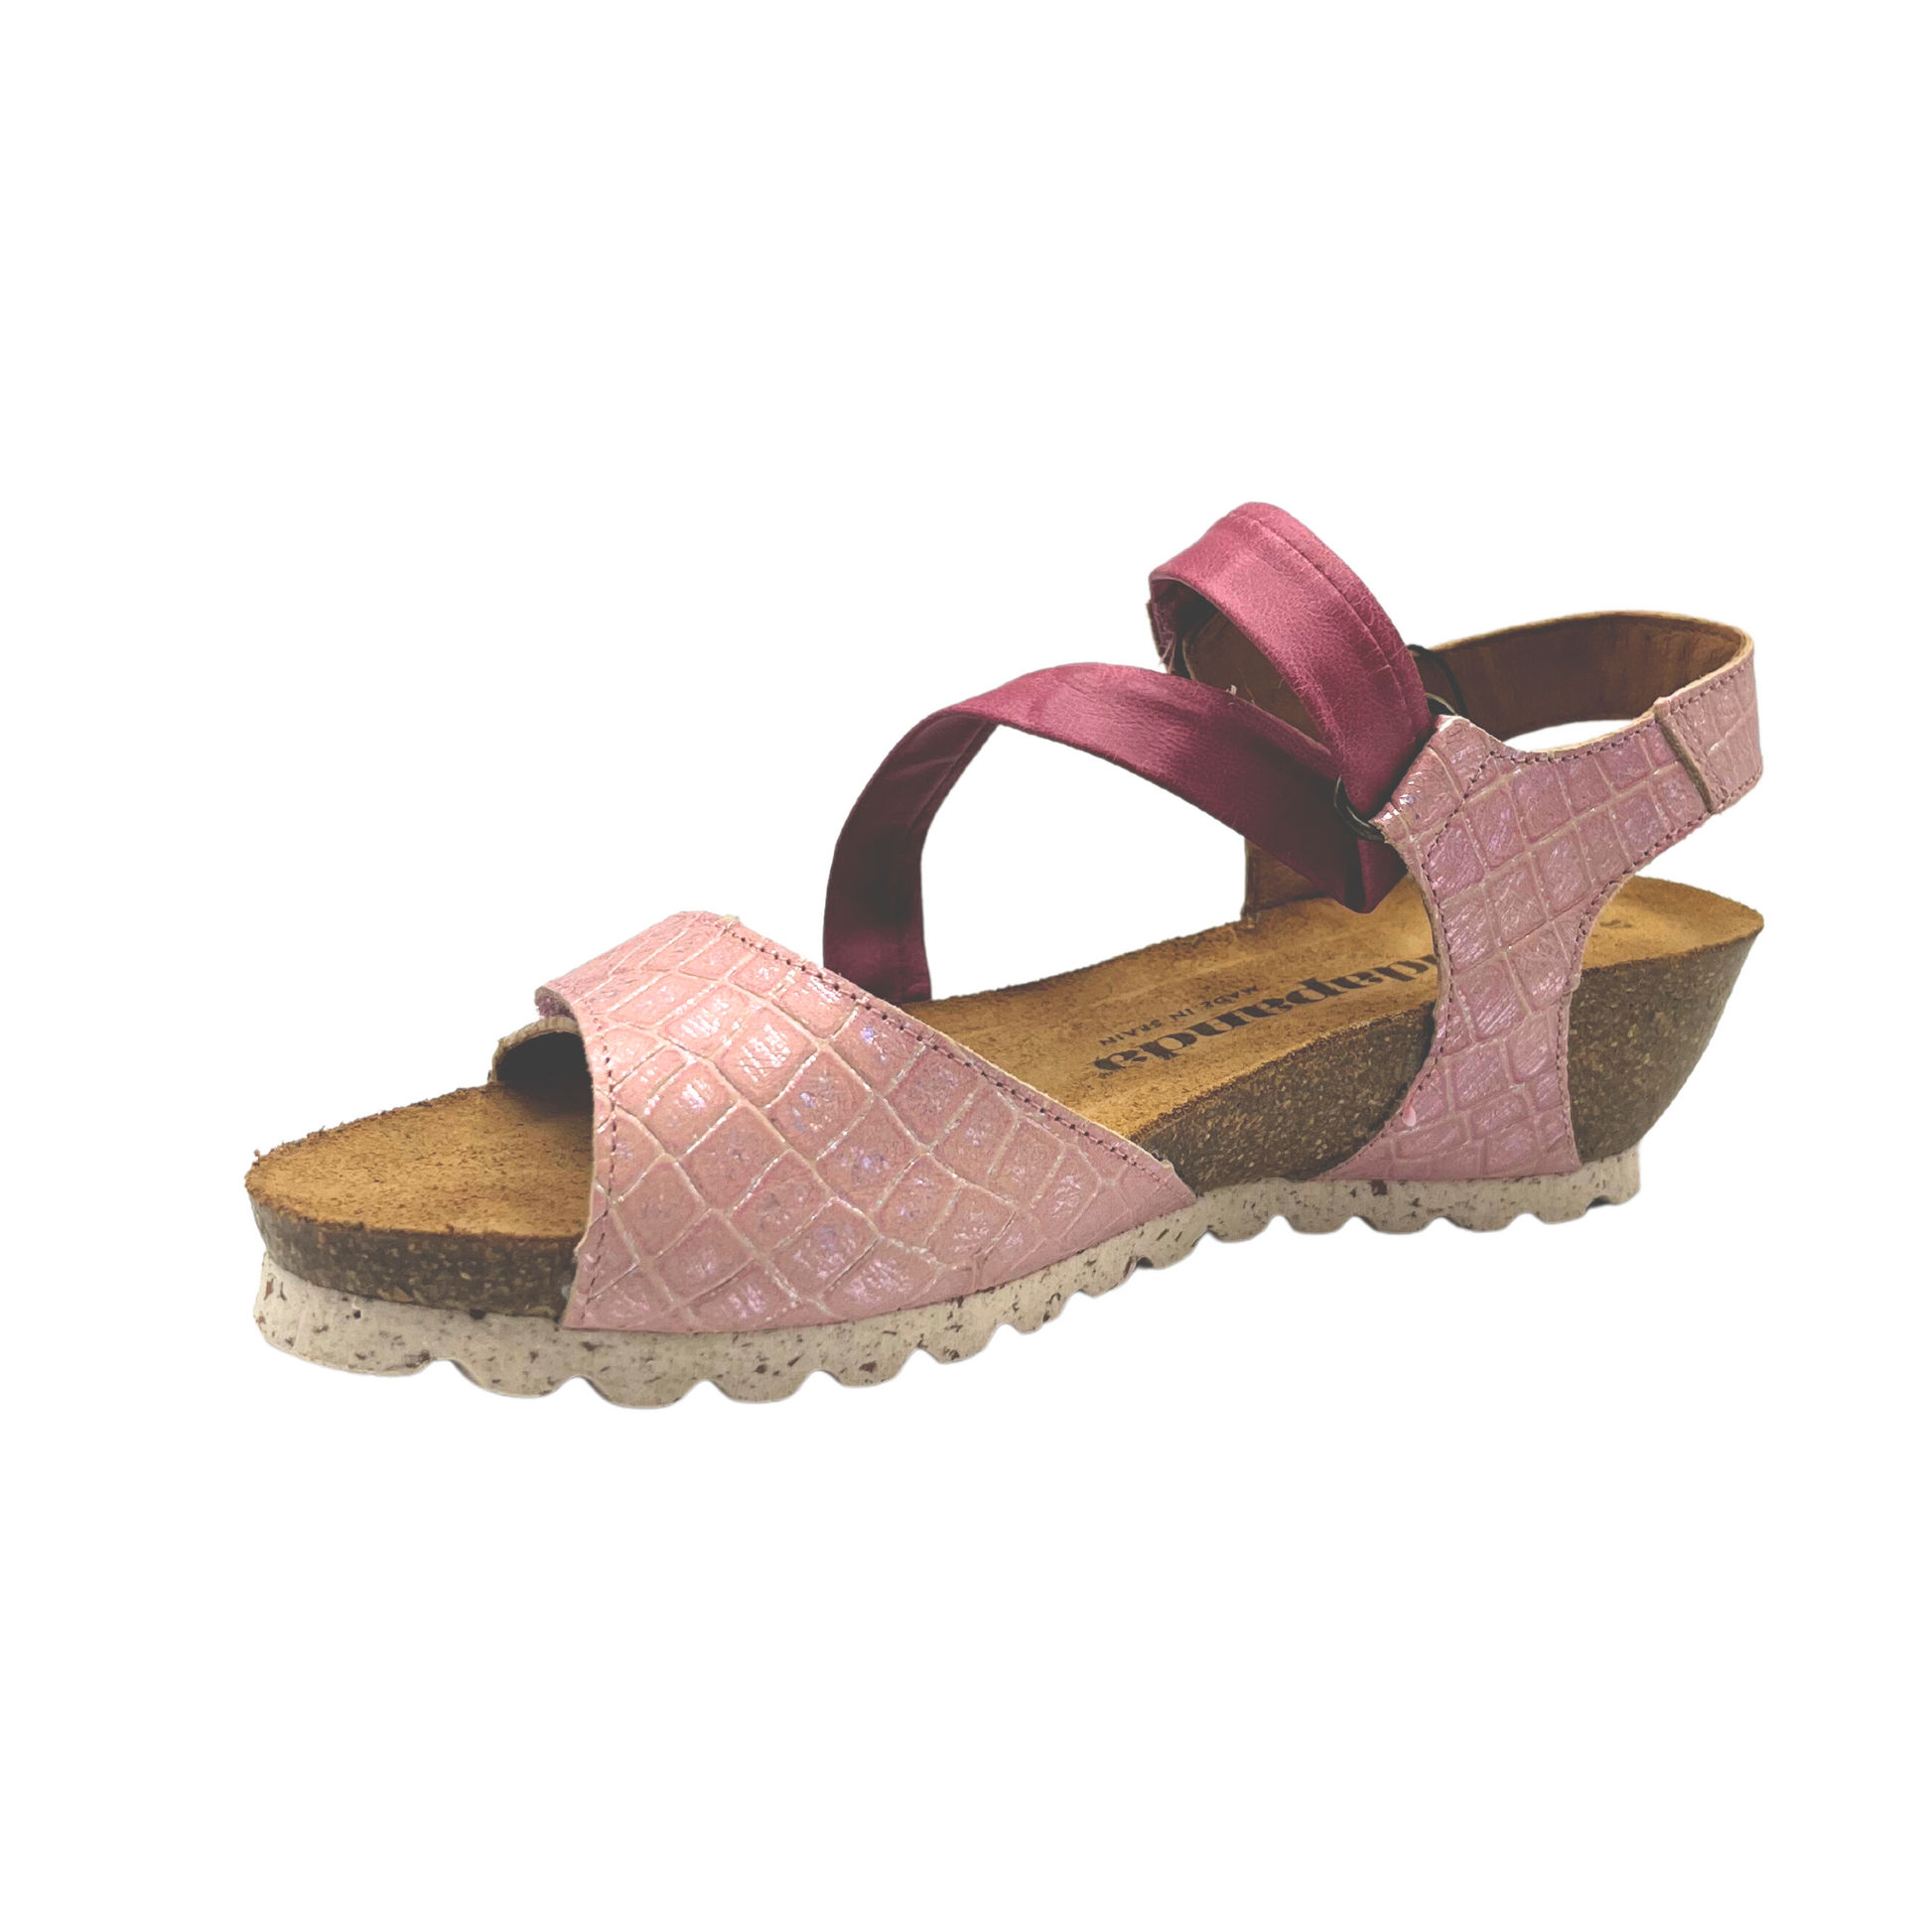 Anlged inside view of a pink leather sandal.  Leather has a croco pattern.